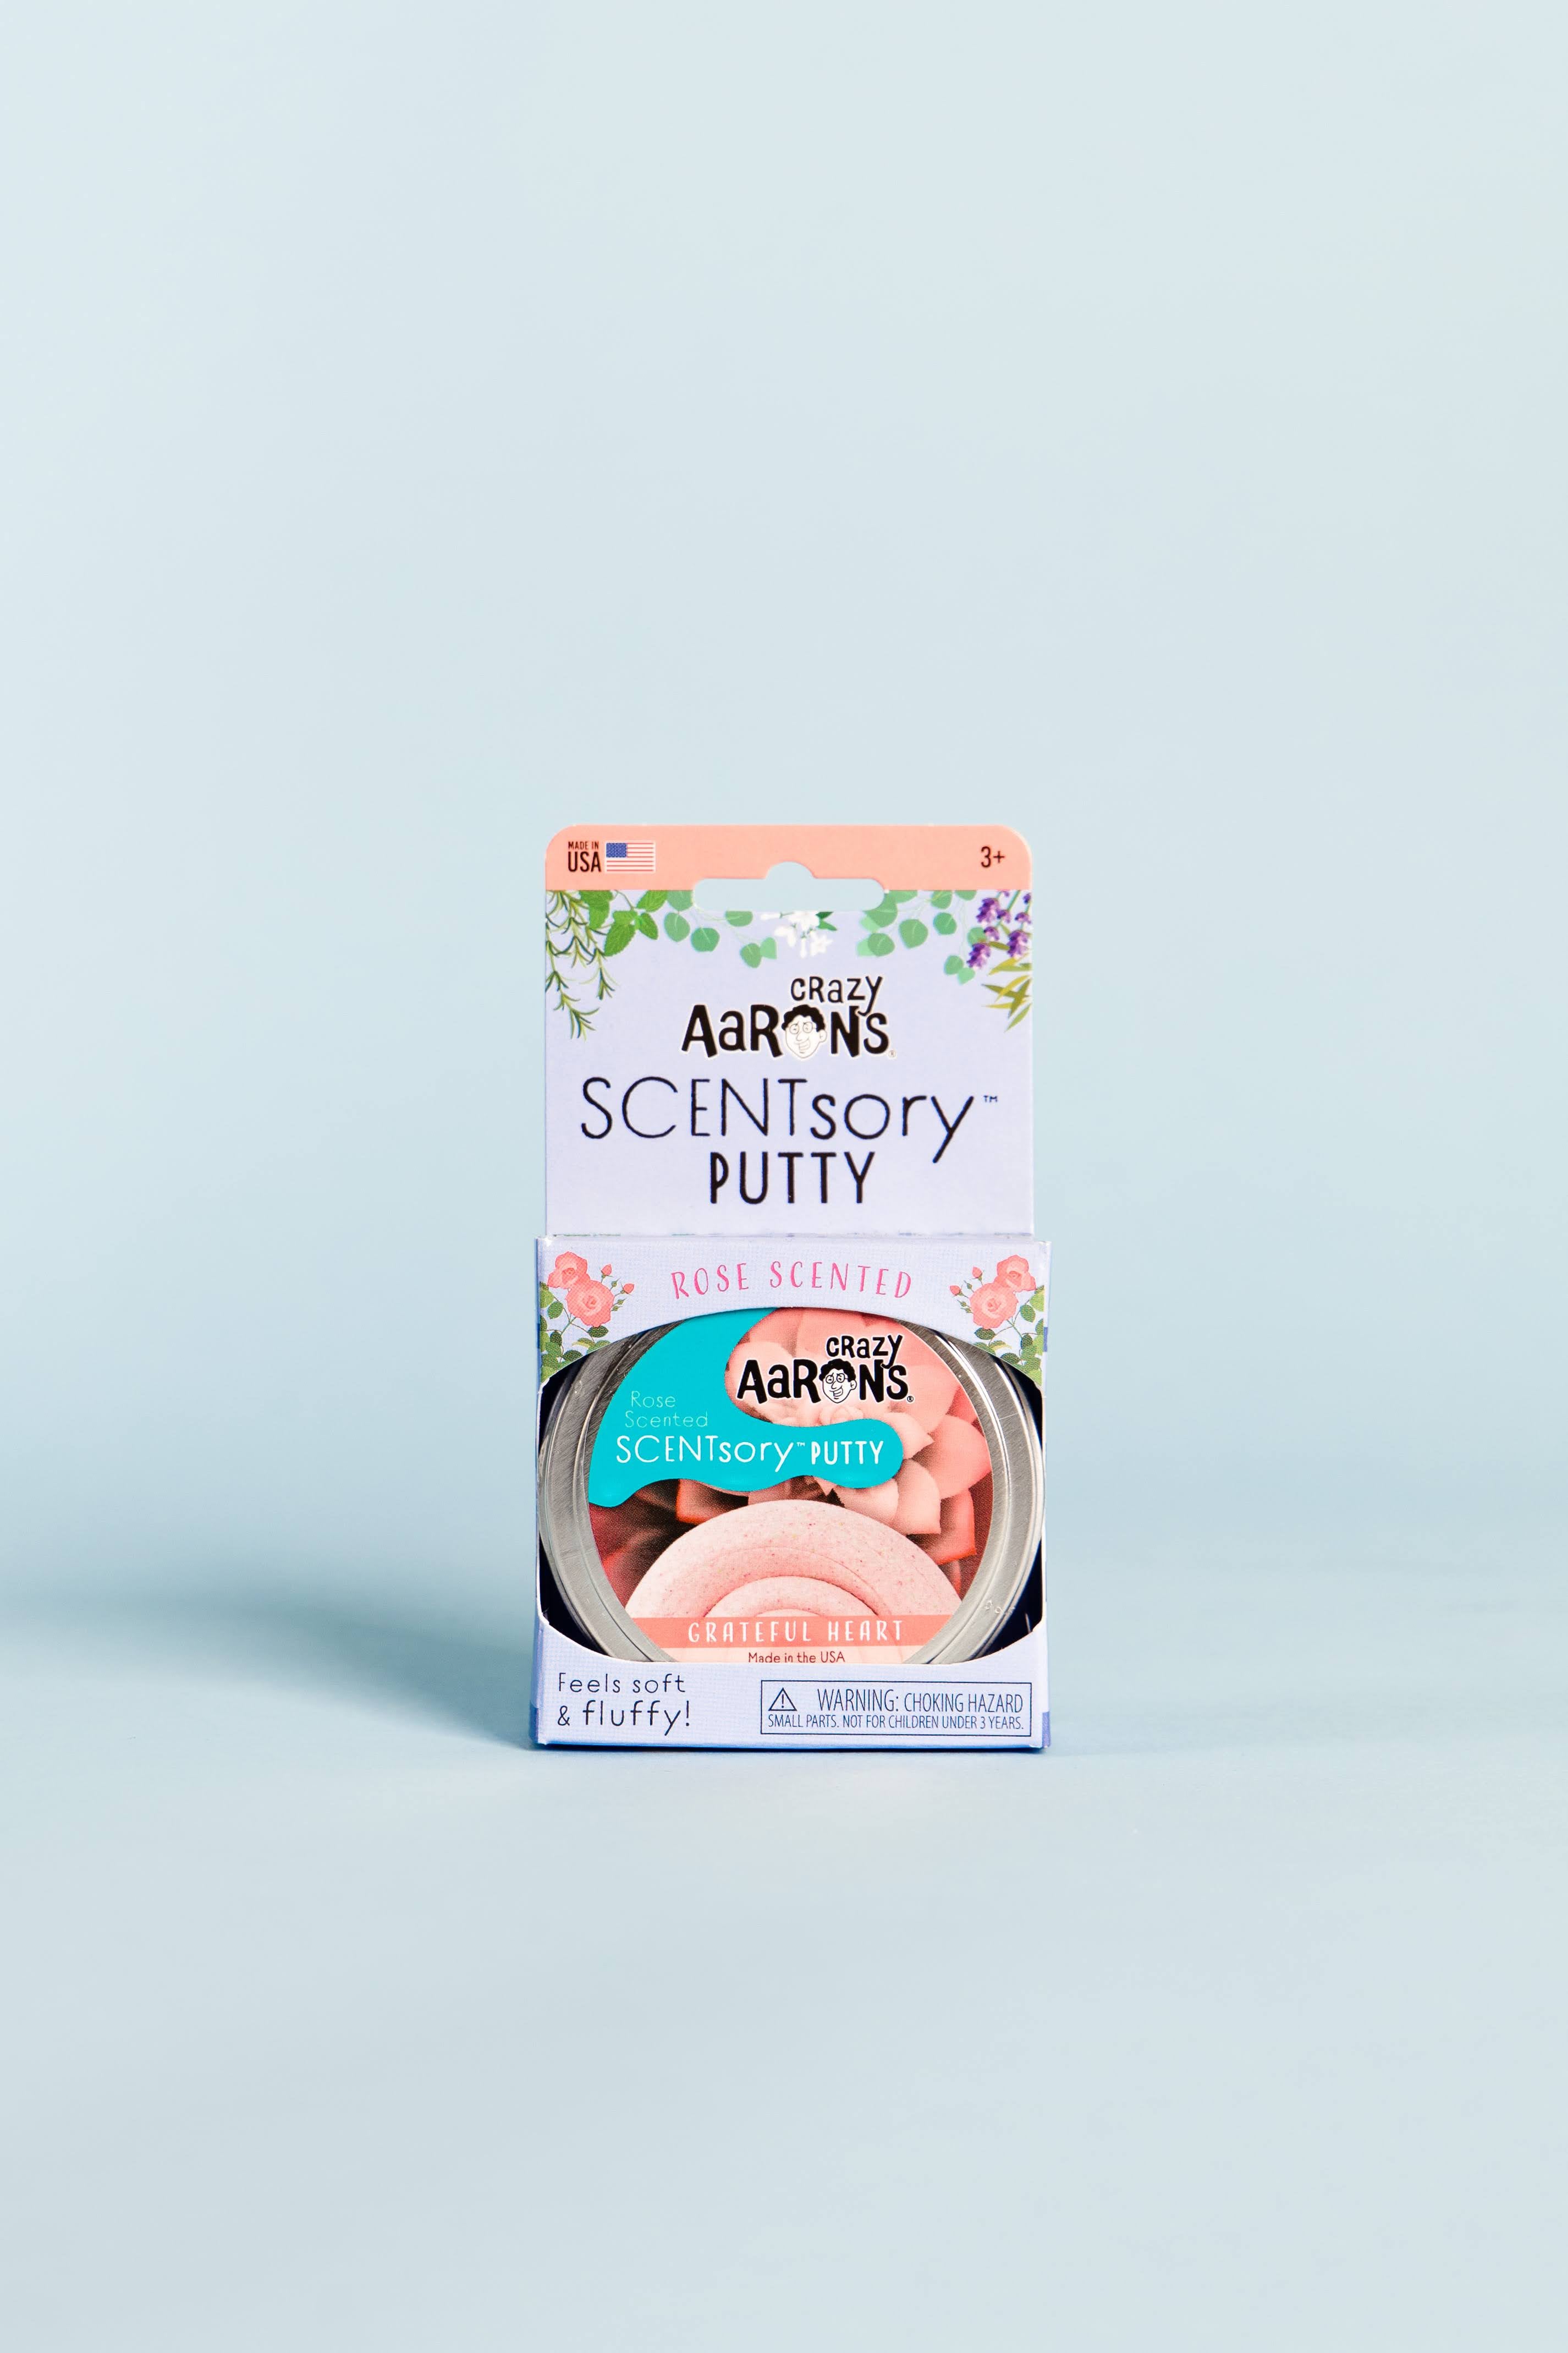 Crazy Aaron's Thinking Putty Mini - Conversation Hearts – Mother